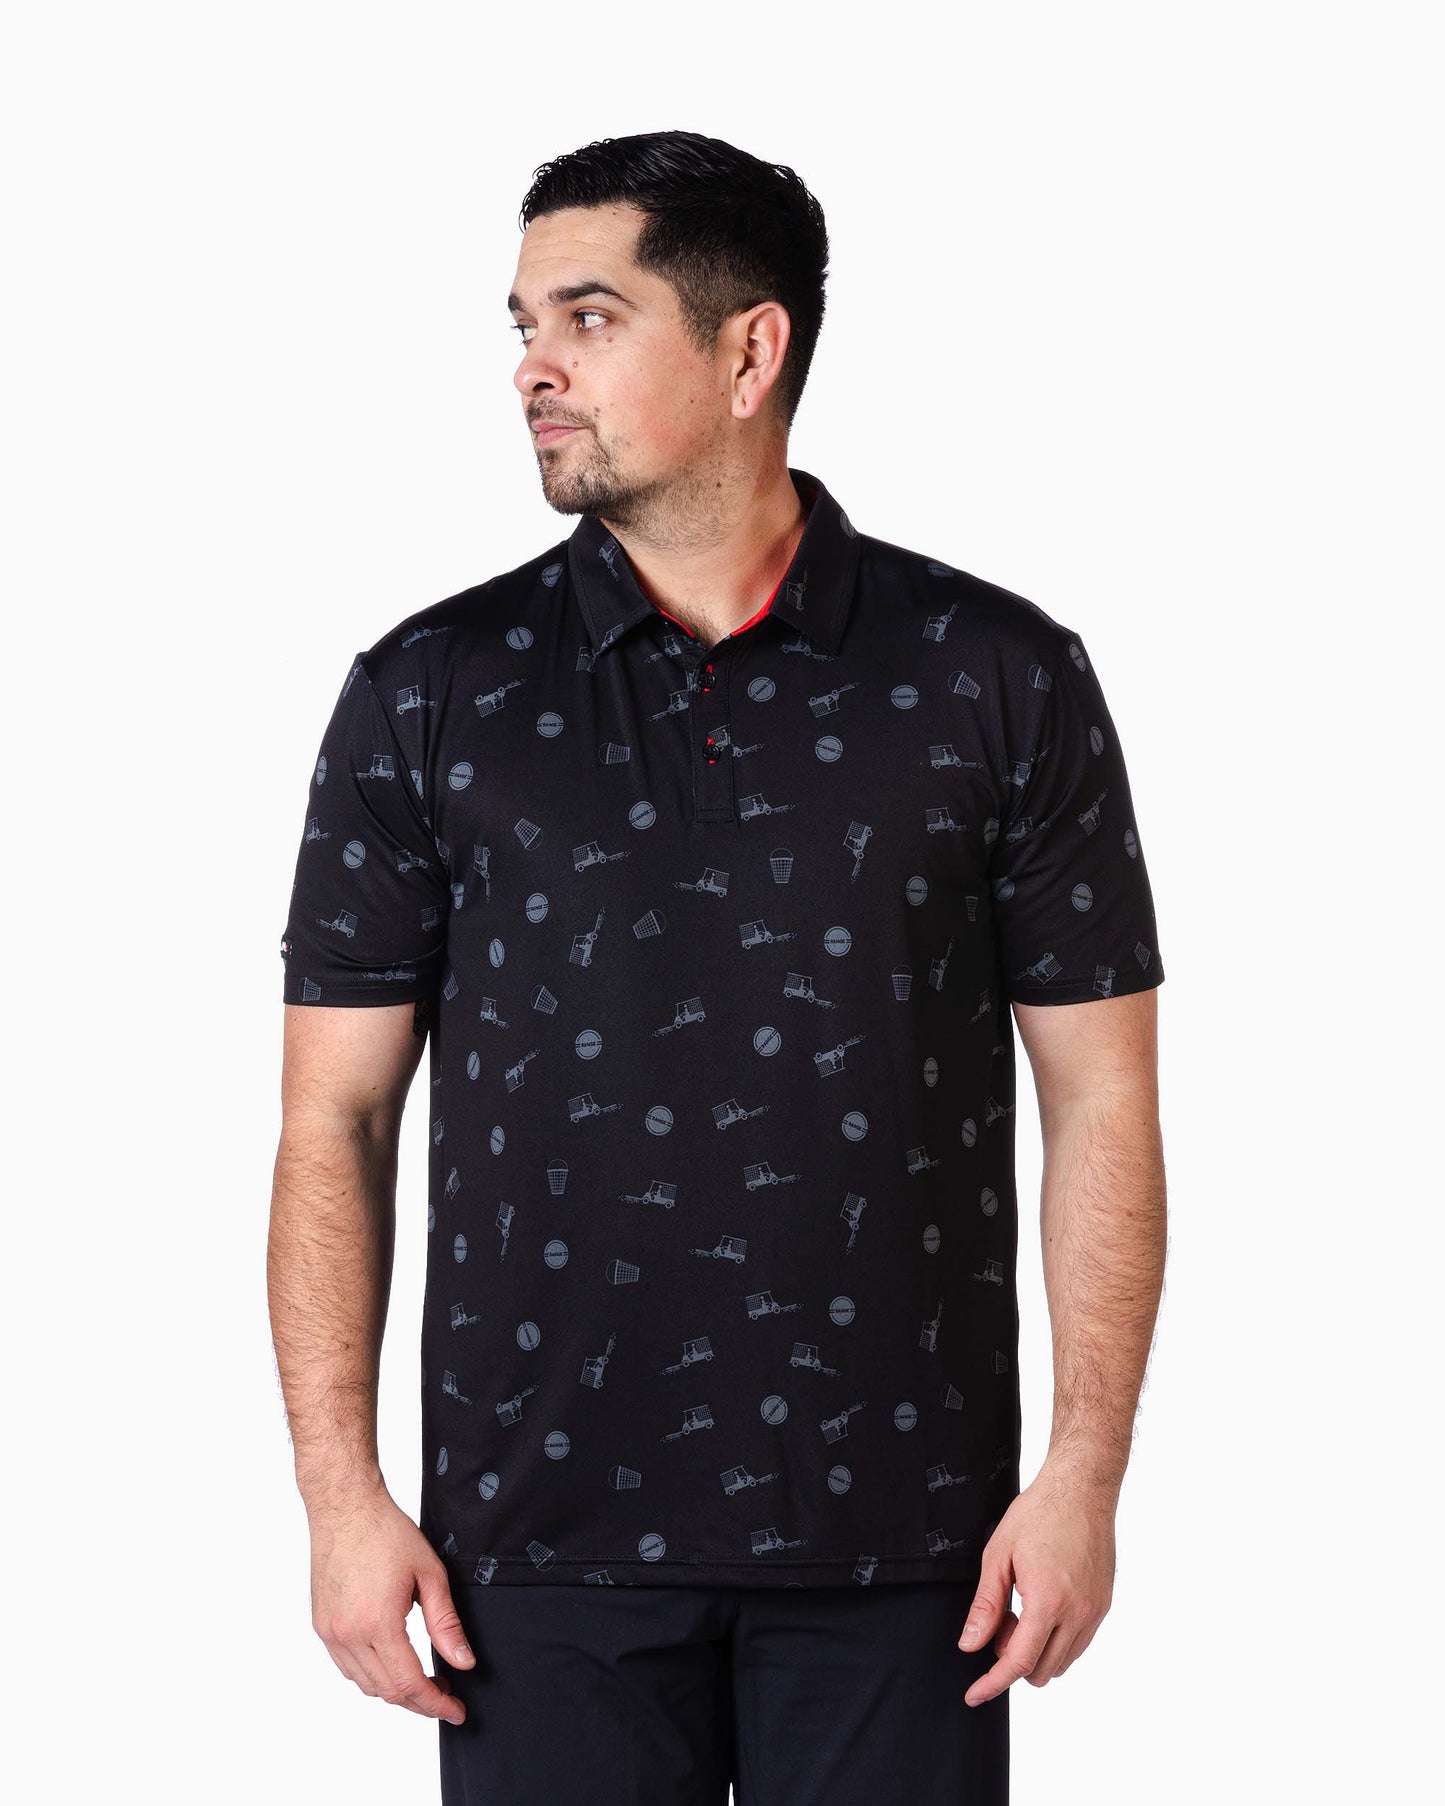 man wearing range polo with golf icons scattered on it